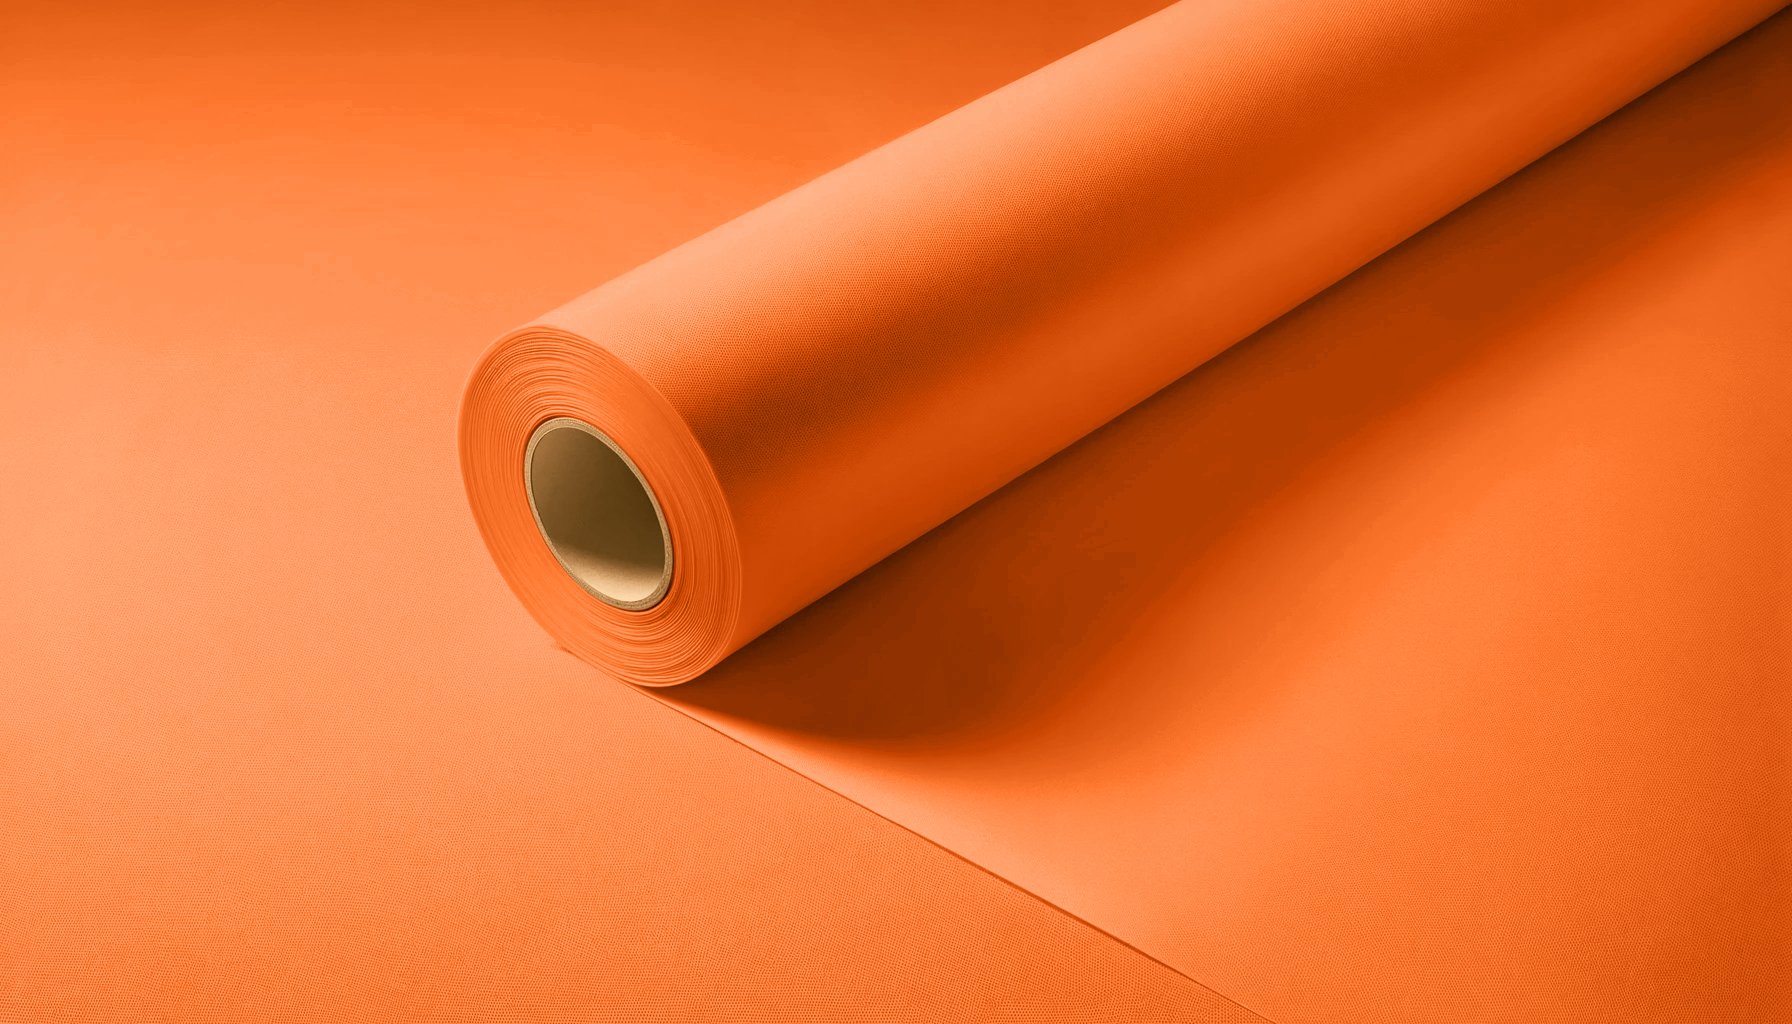 Peel & Stick Removable Re-usable Paint - Color RAL 2008 Bright Red Orange - offRAL™ - RALRAW LLC, USA